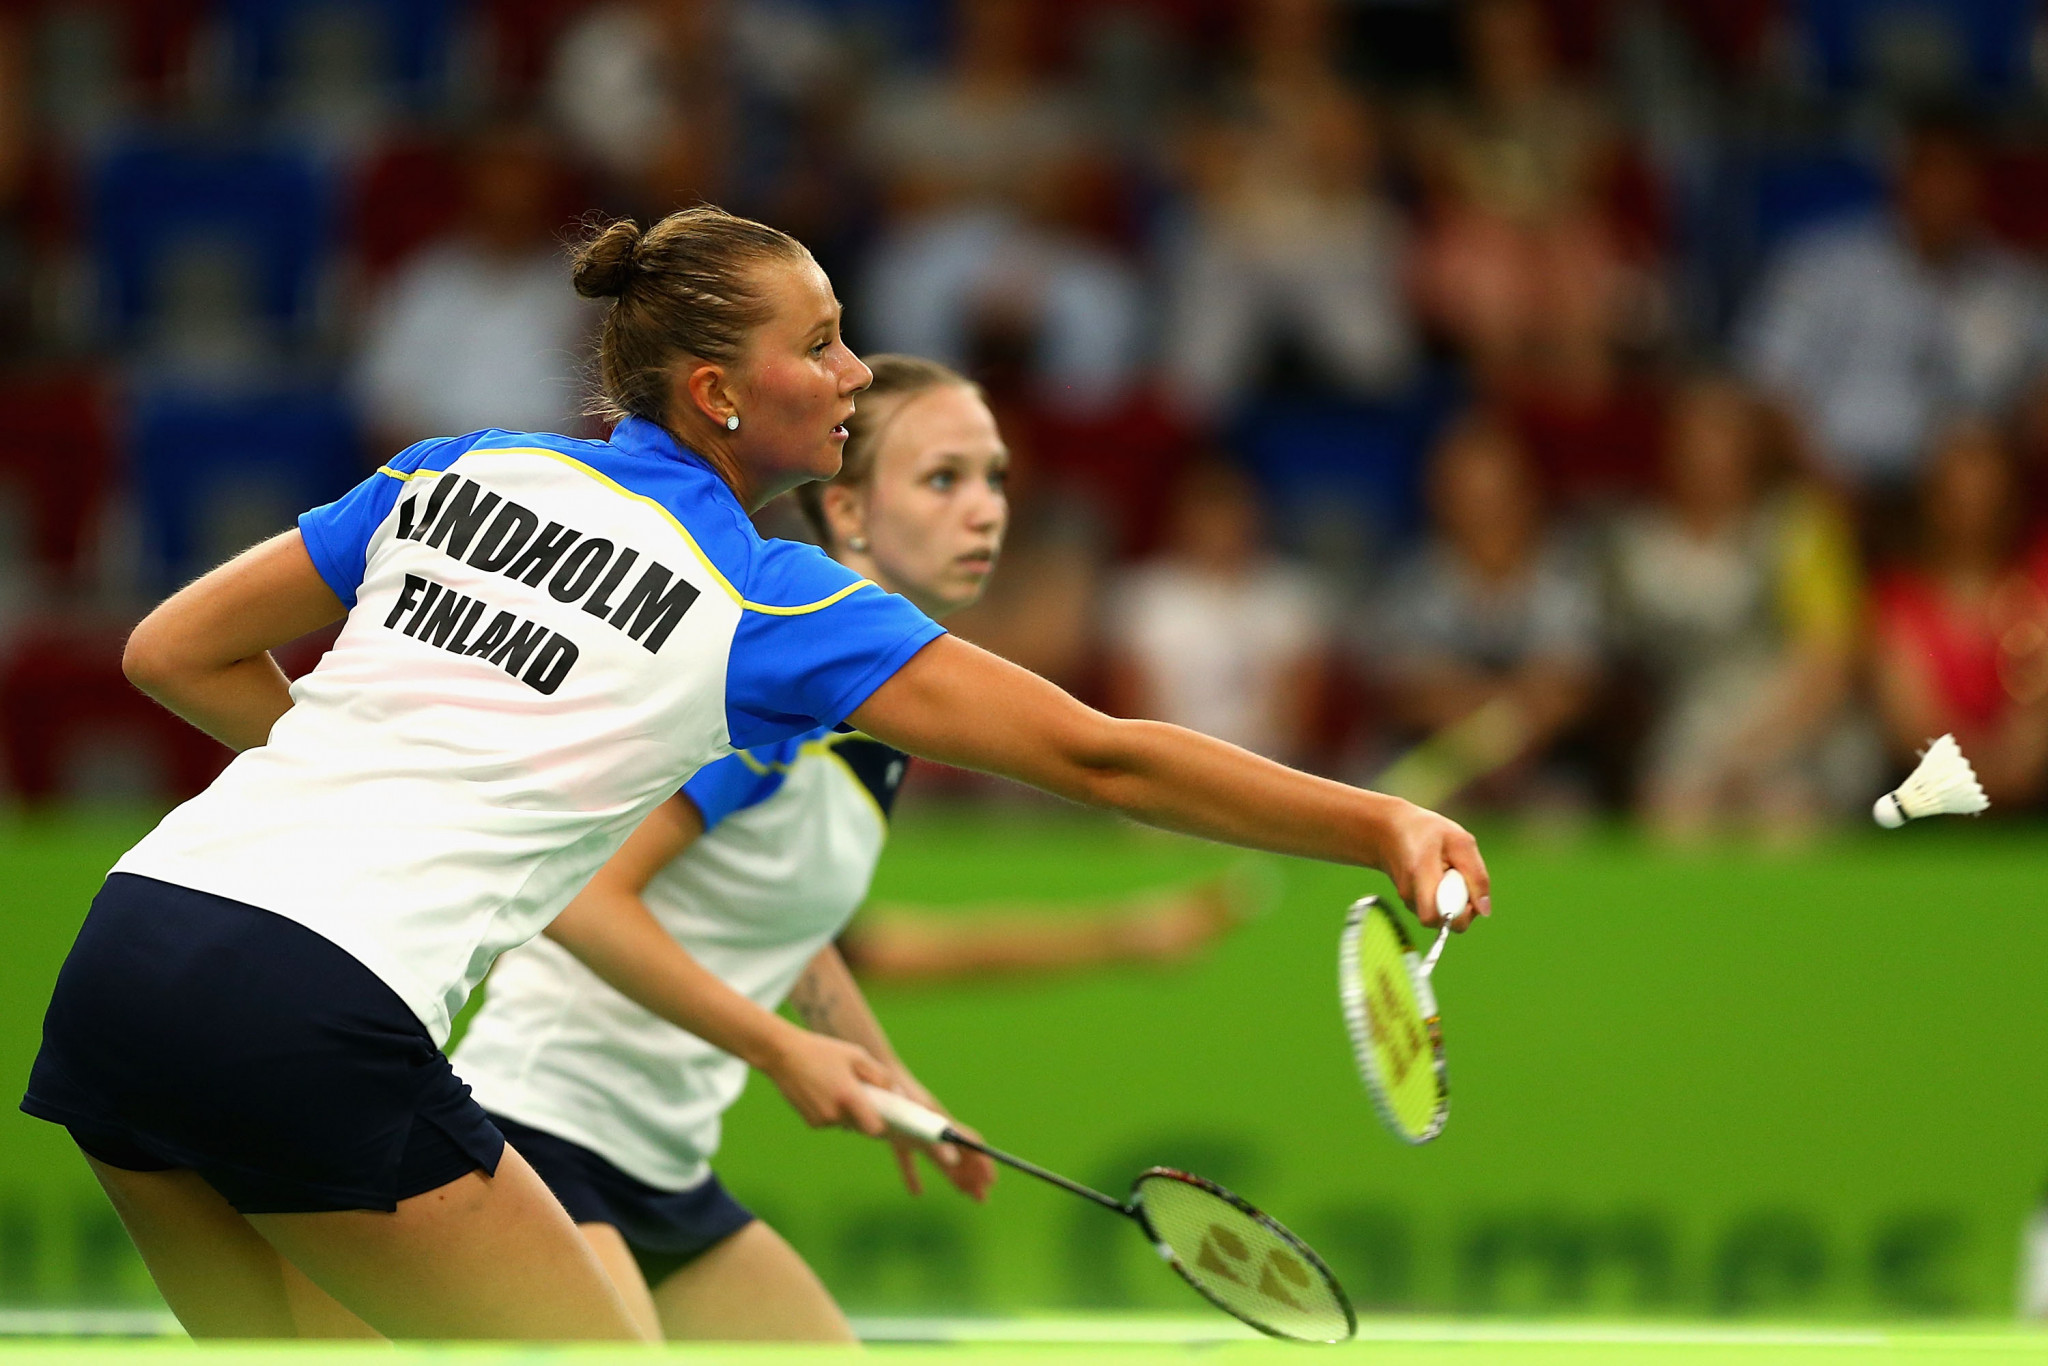 Finland will host a major European badminton event for the first time ©Getty Images